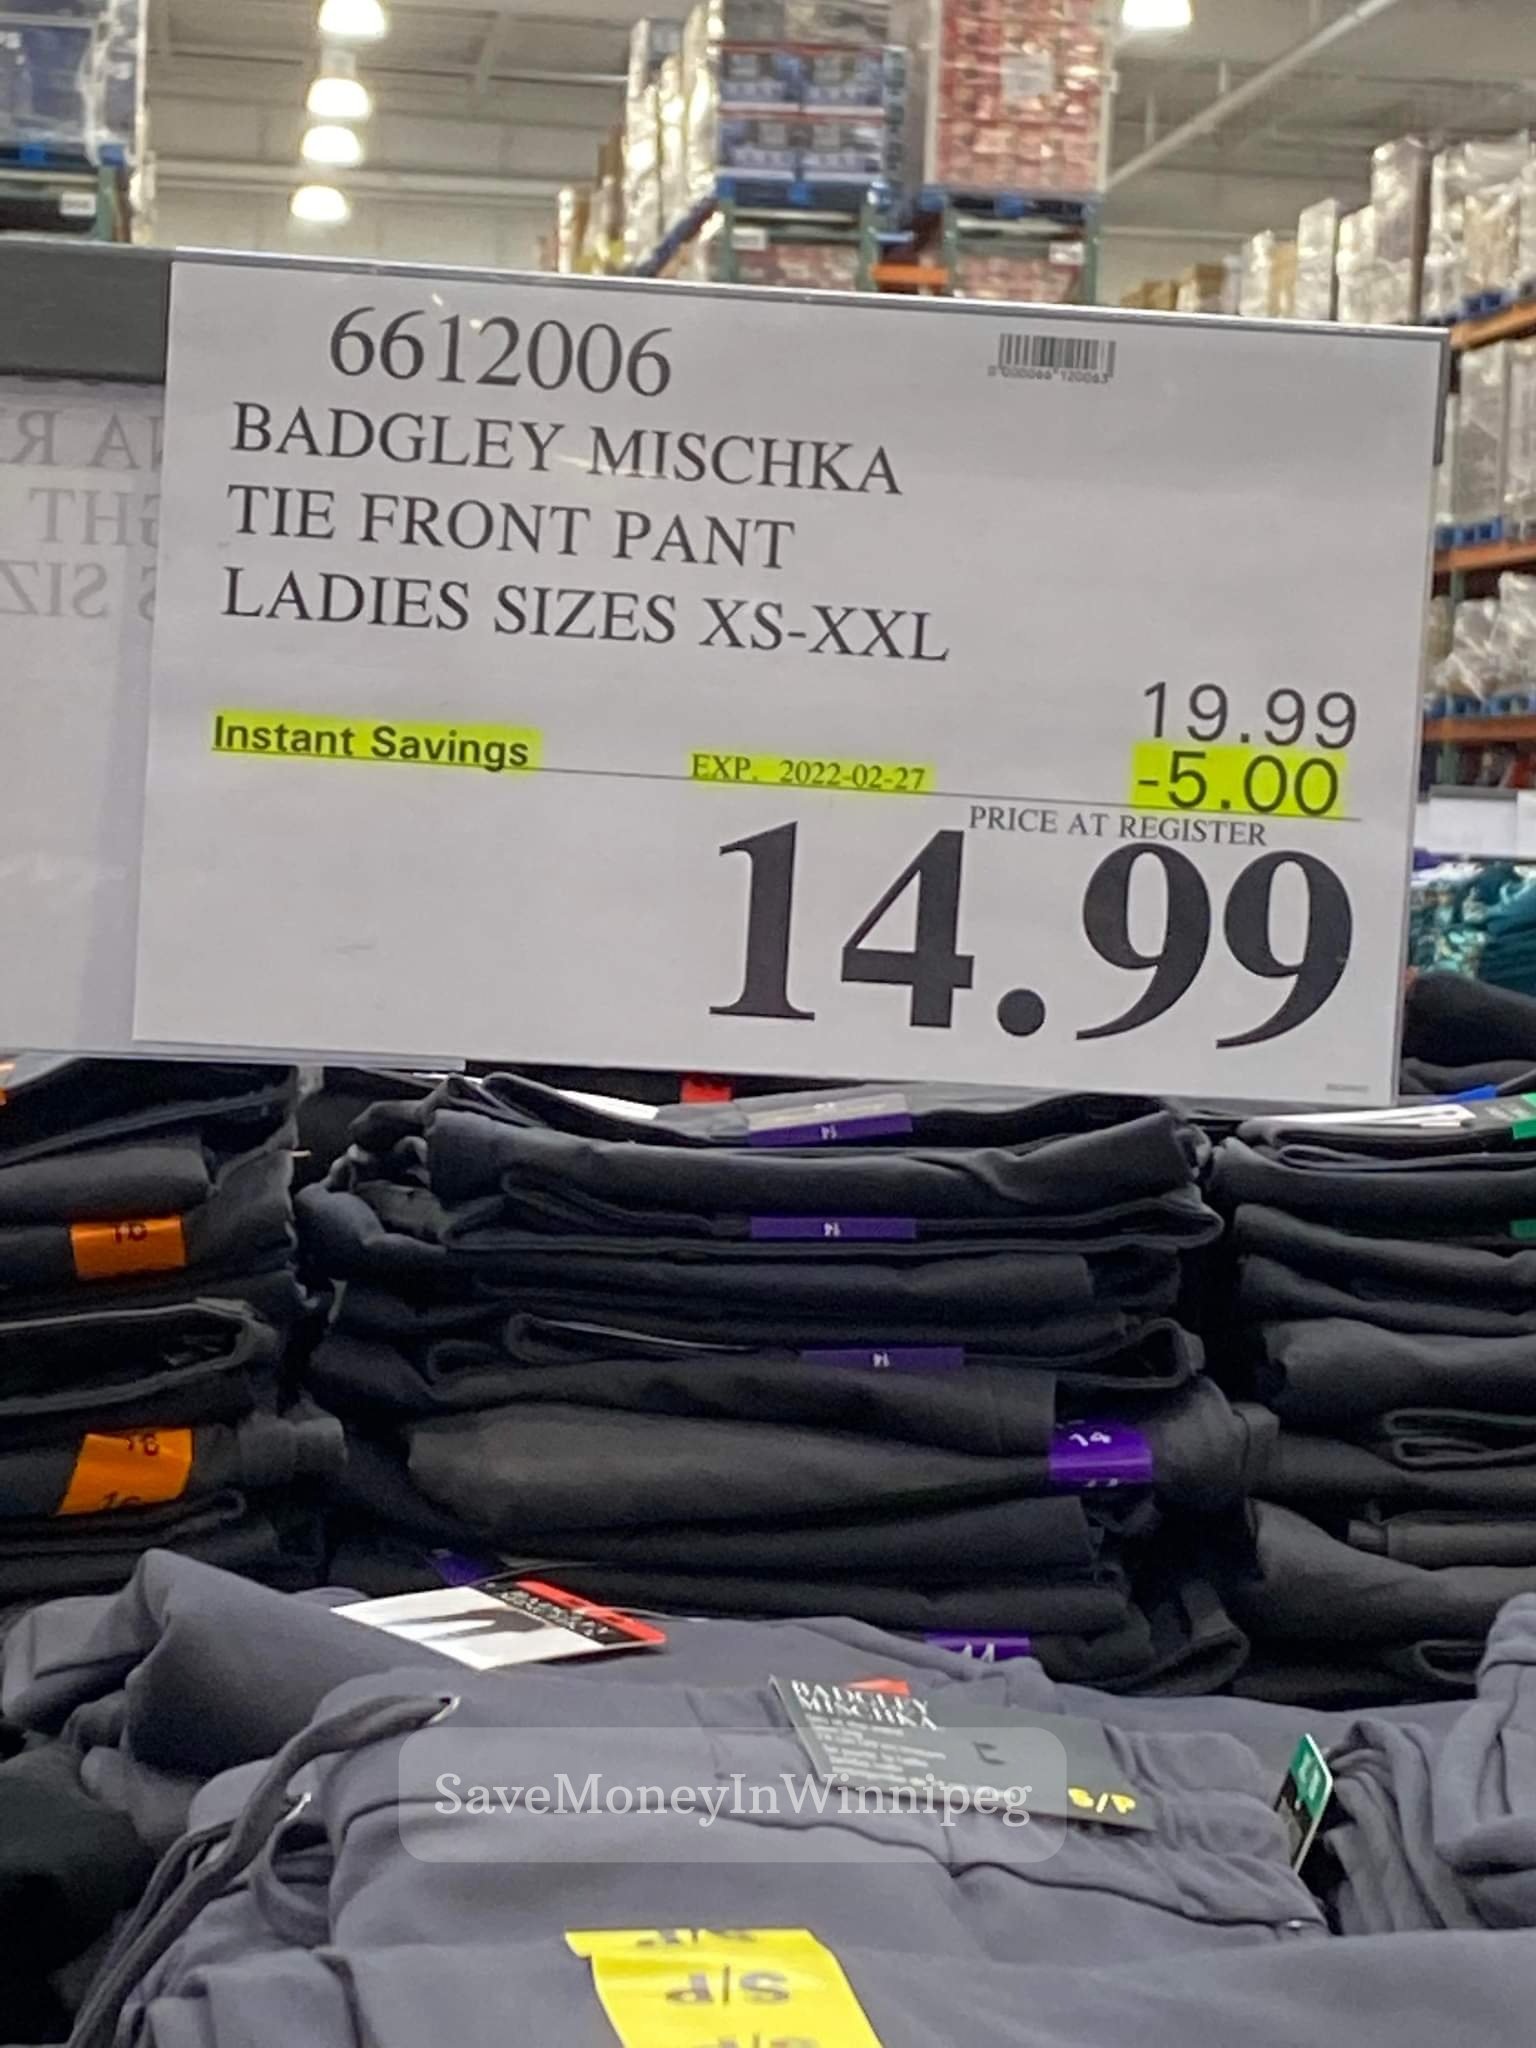 Part 2 - Costco unadvertised deals of the week starting February